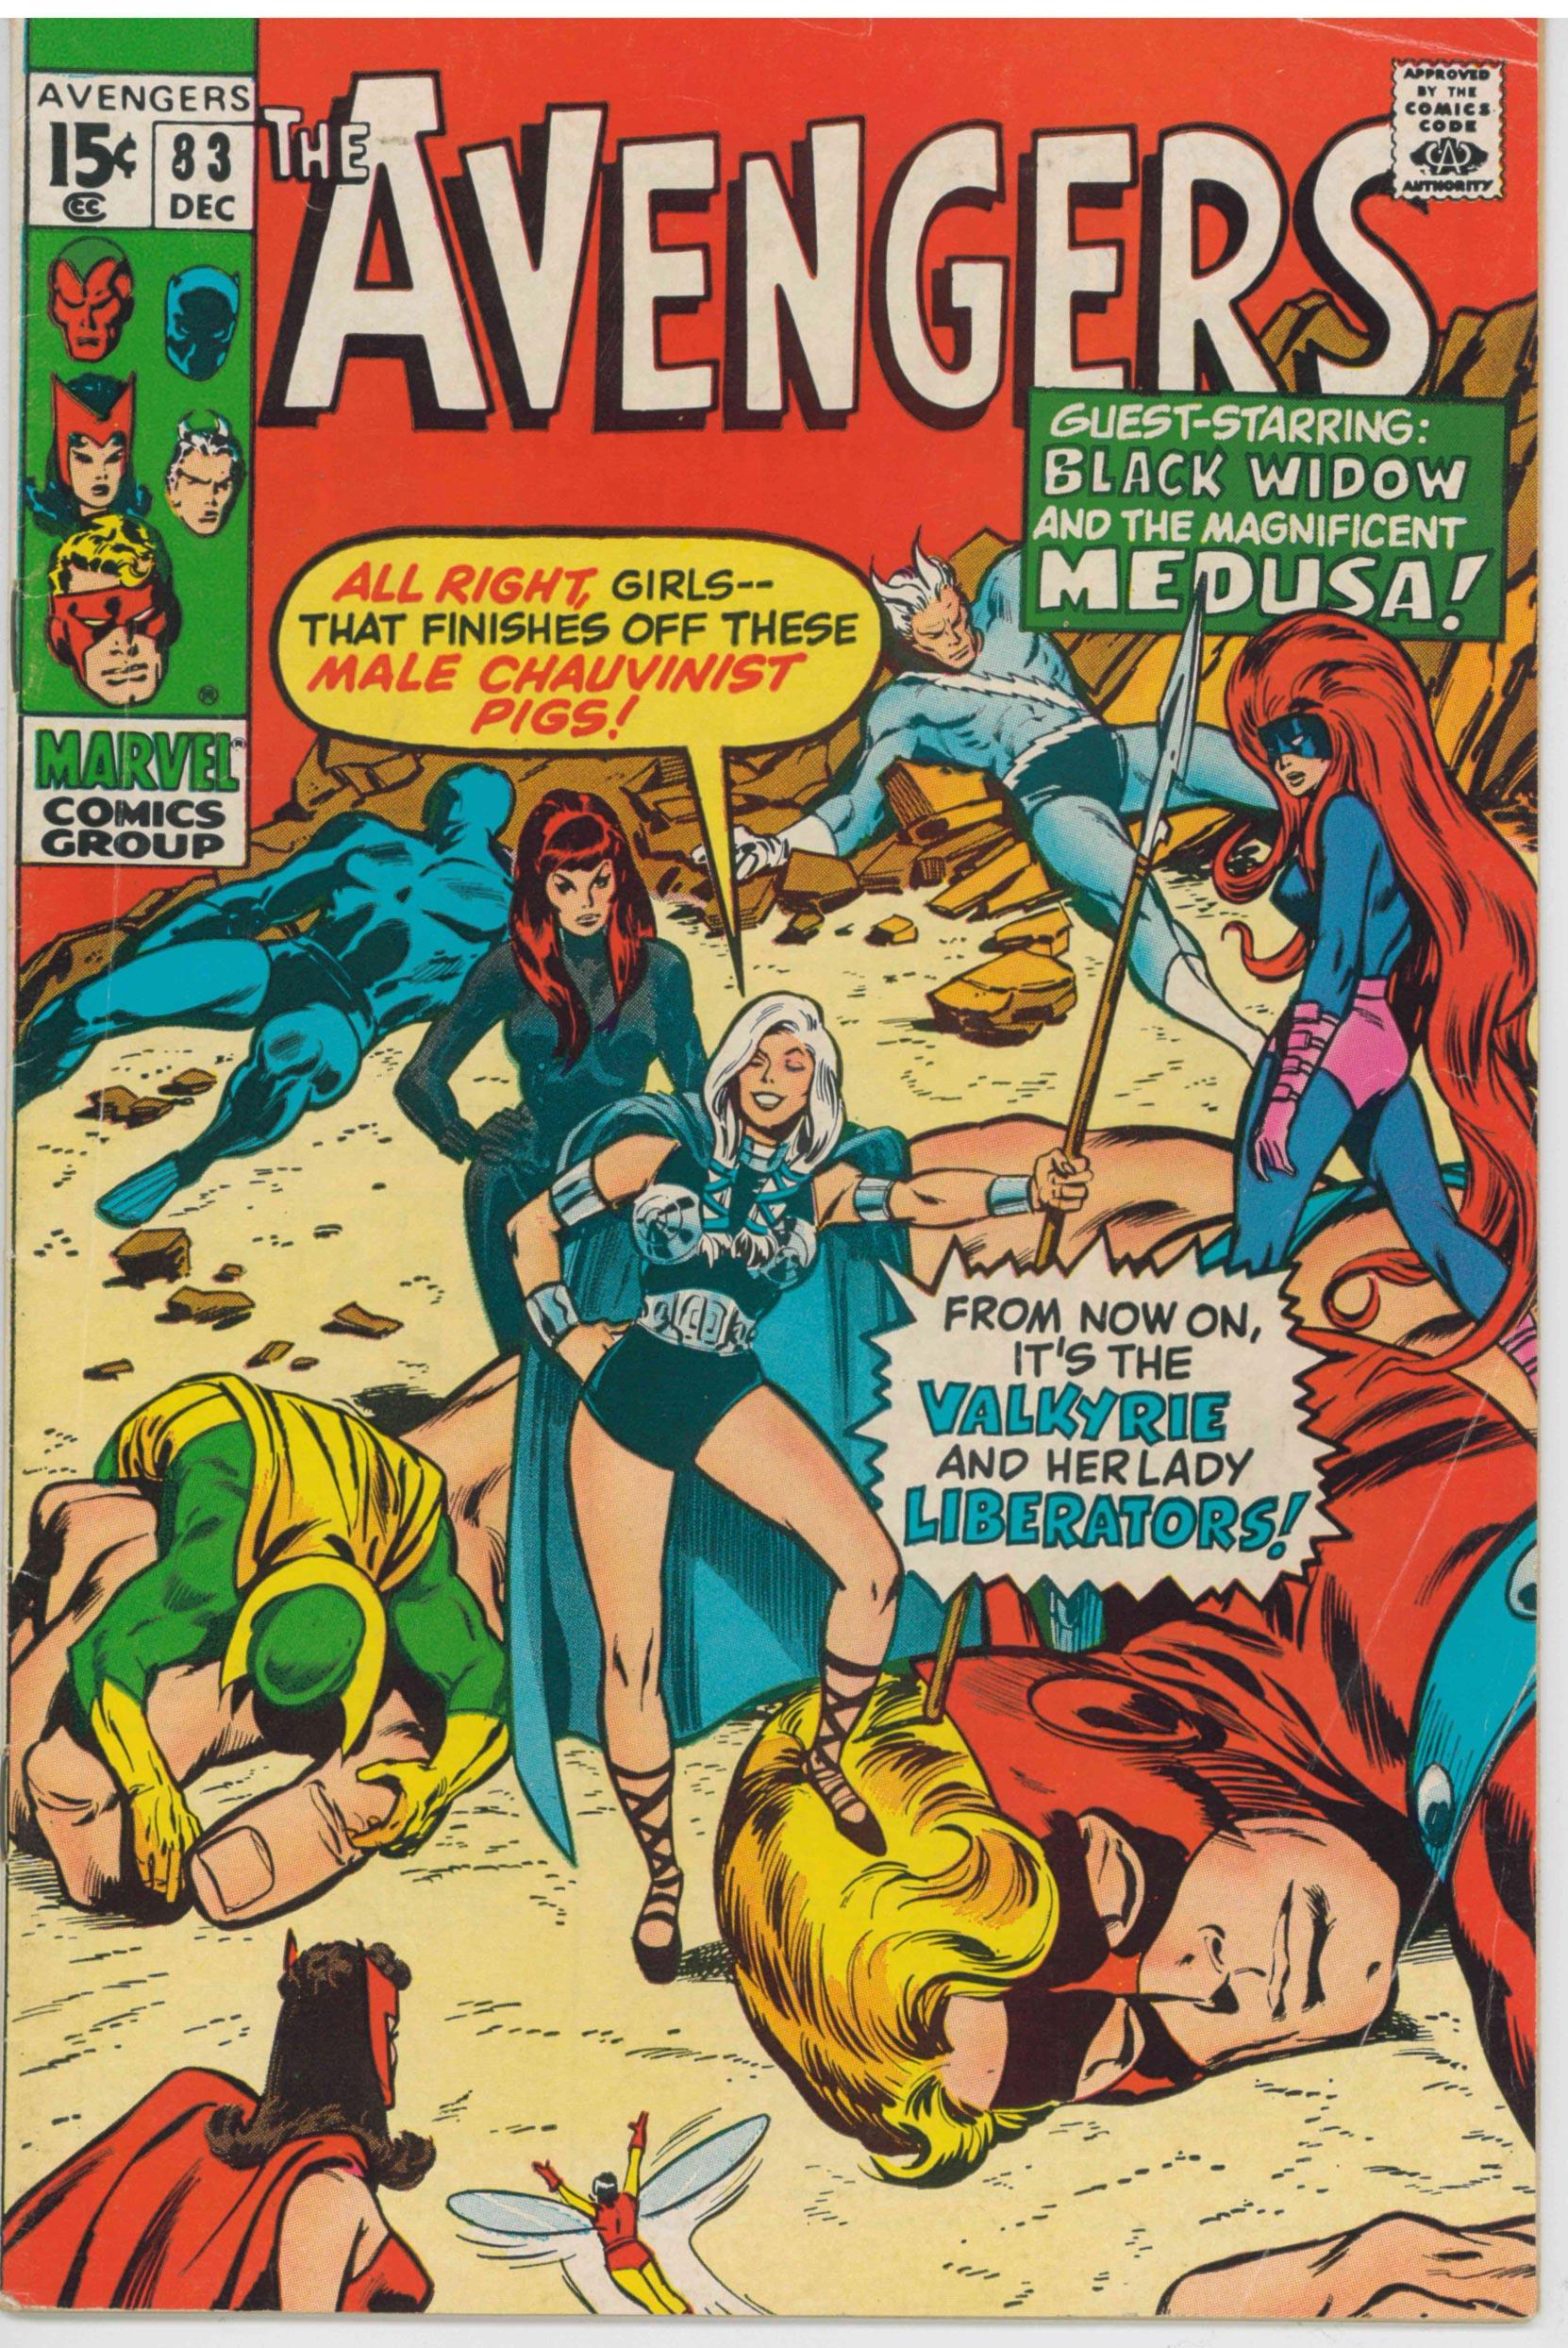 AVENGERS (1963) #83 (FN) - FIRST APPEARANCE VALKYRIE - Kings Comics